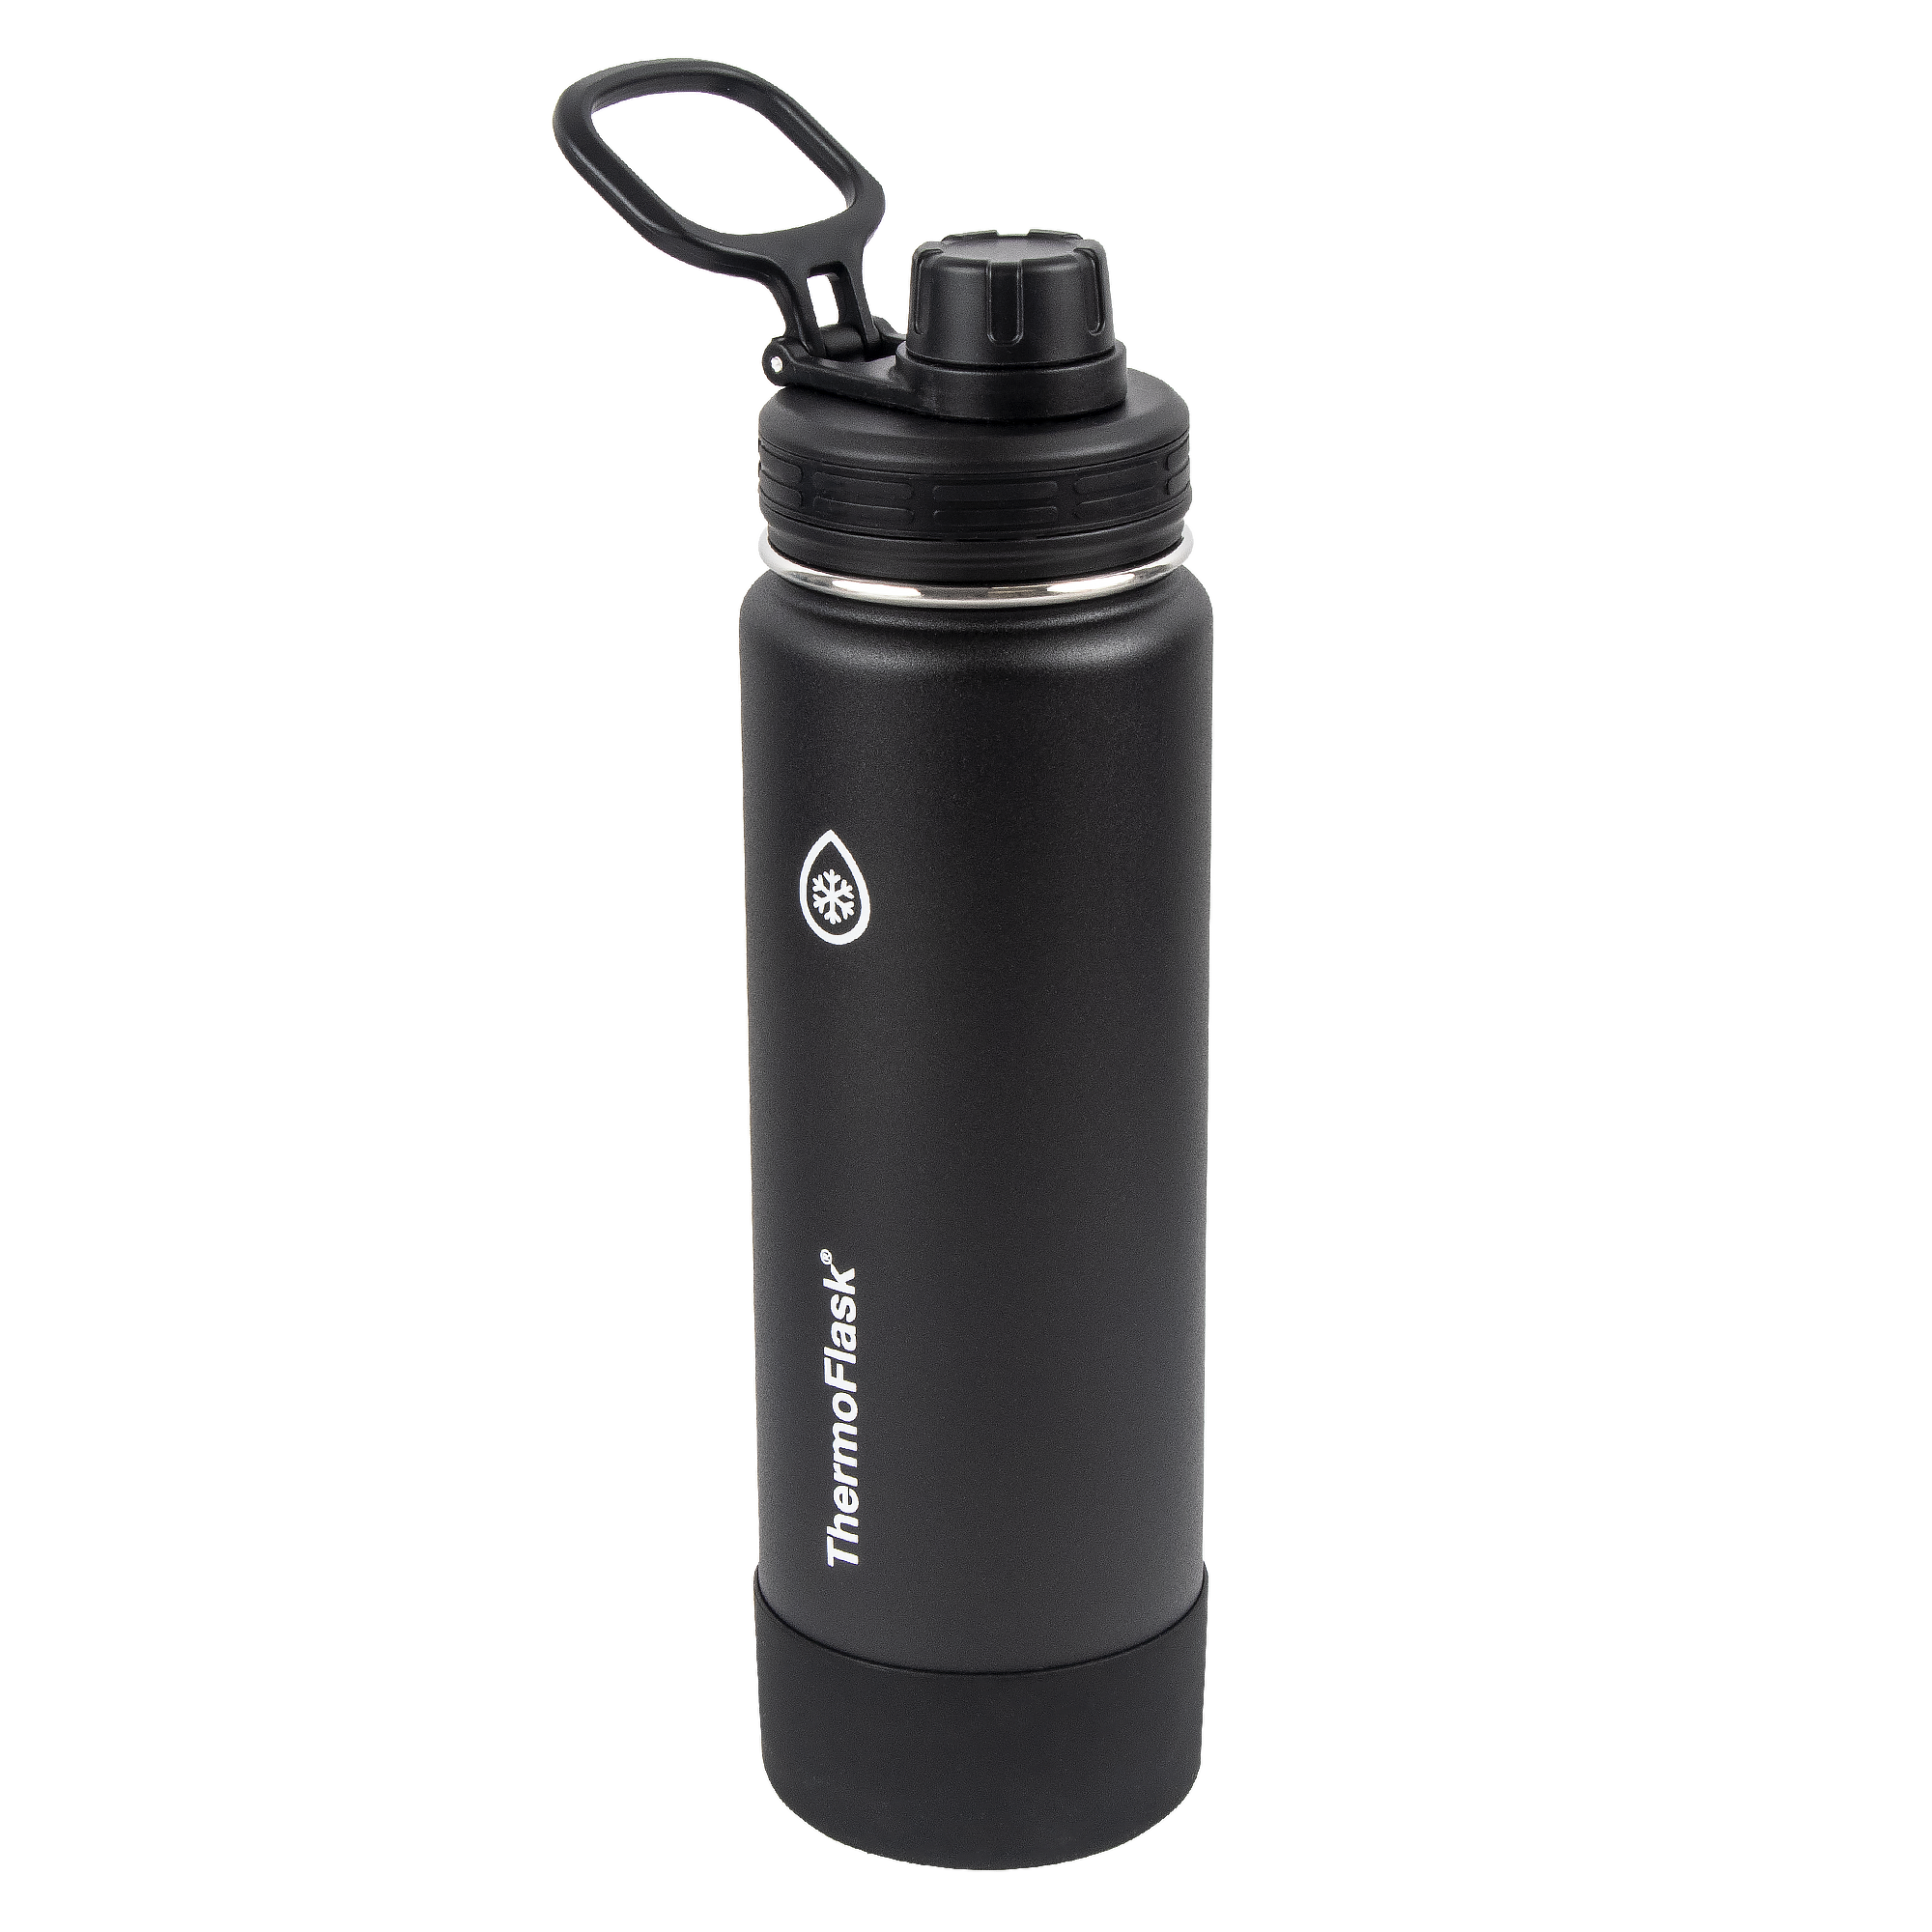 http://mythermoflask.com/cdn/shop/products/1424563-Thermoflask-Spout-24-Black-FrontAngle_c9b8c66a-75e6-410d-a2b2-bf5d65fb486f.png?v=1644529826